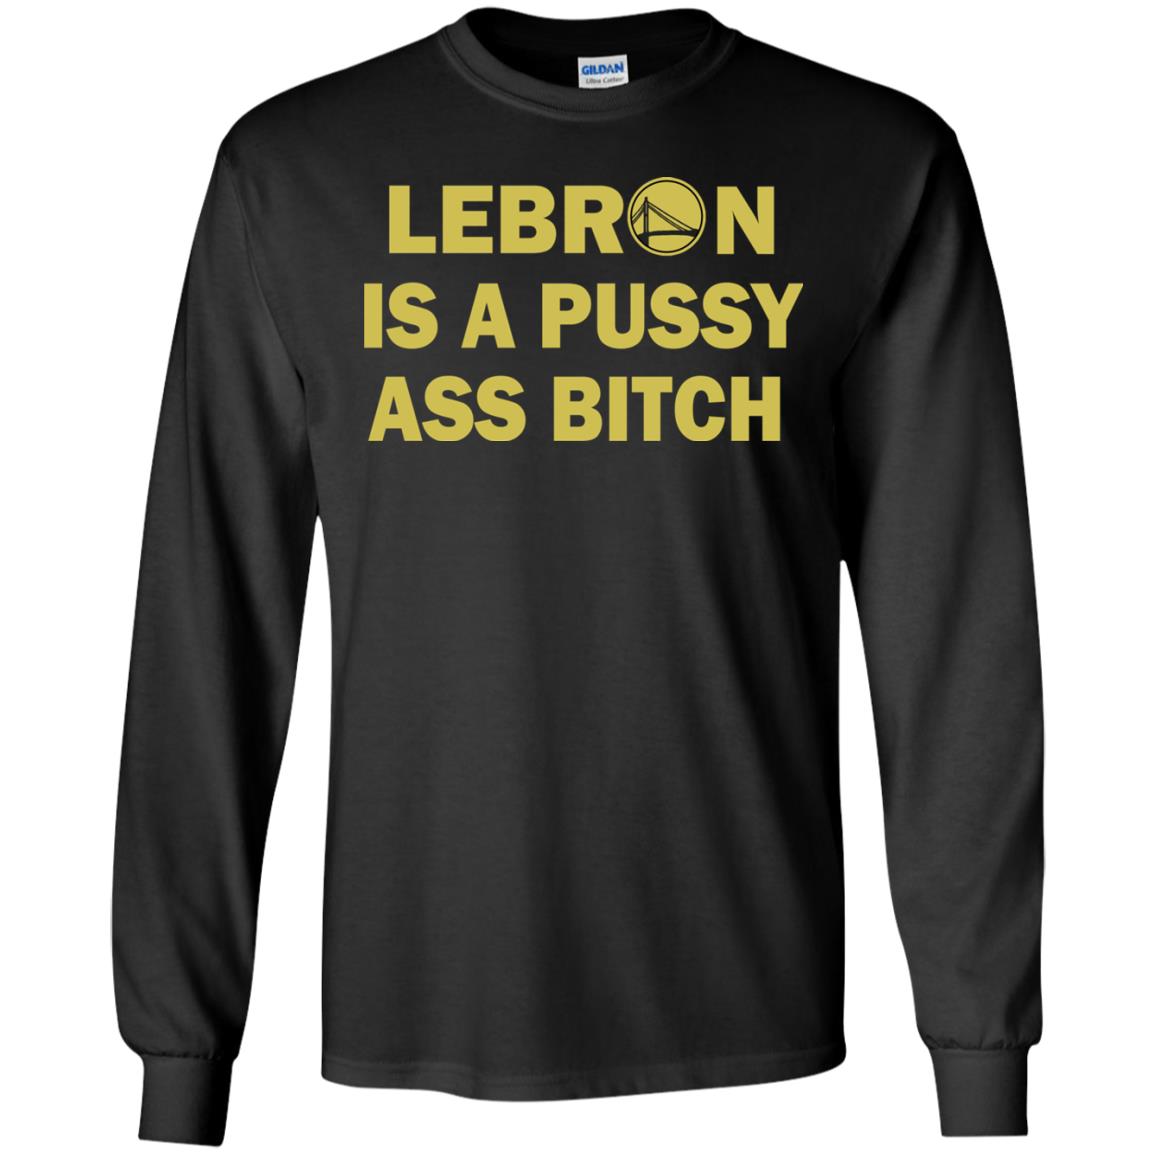 Leborn Is A Pussy Shirt